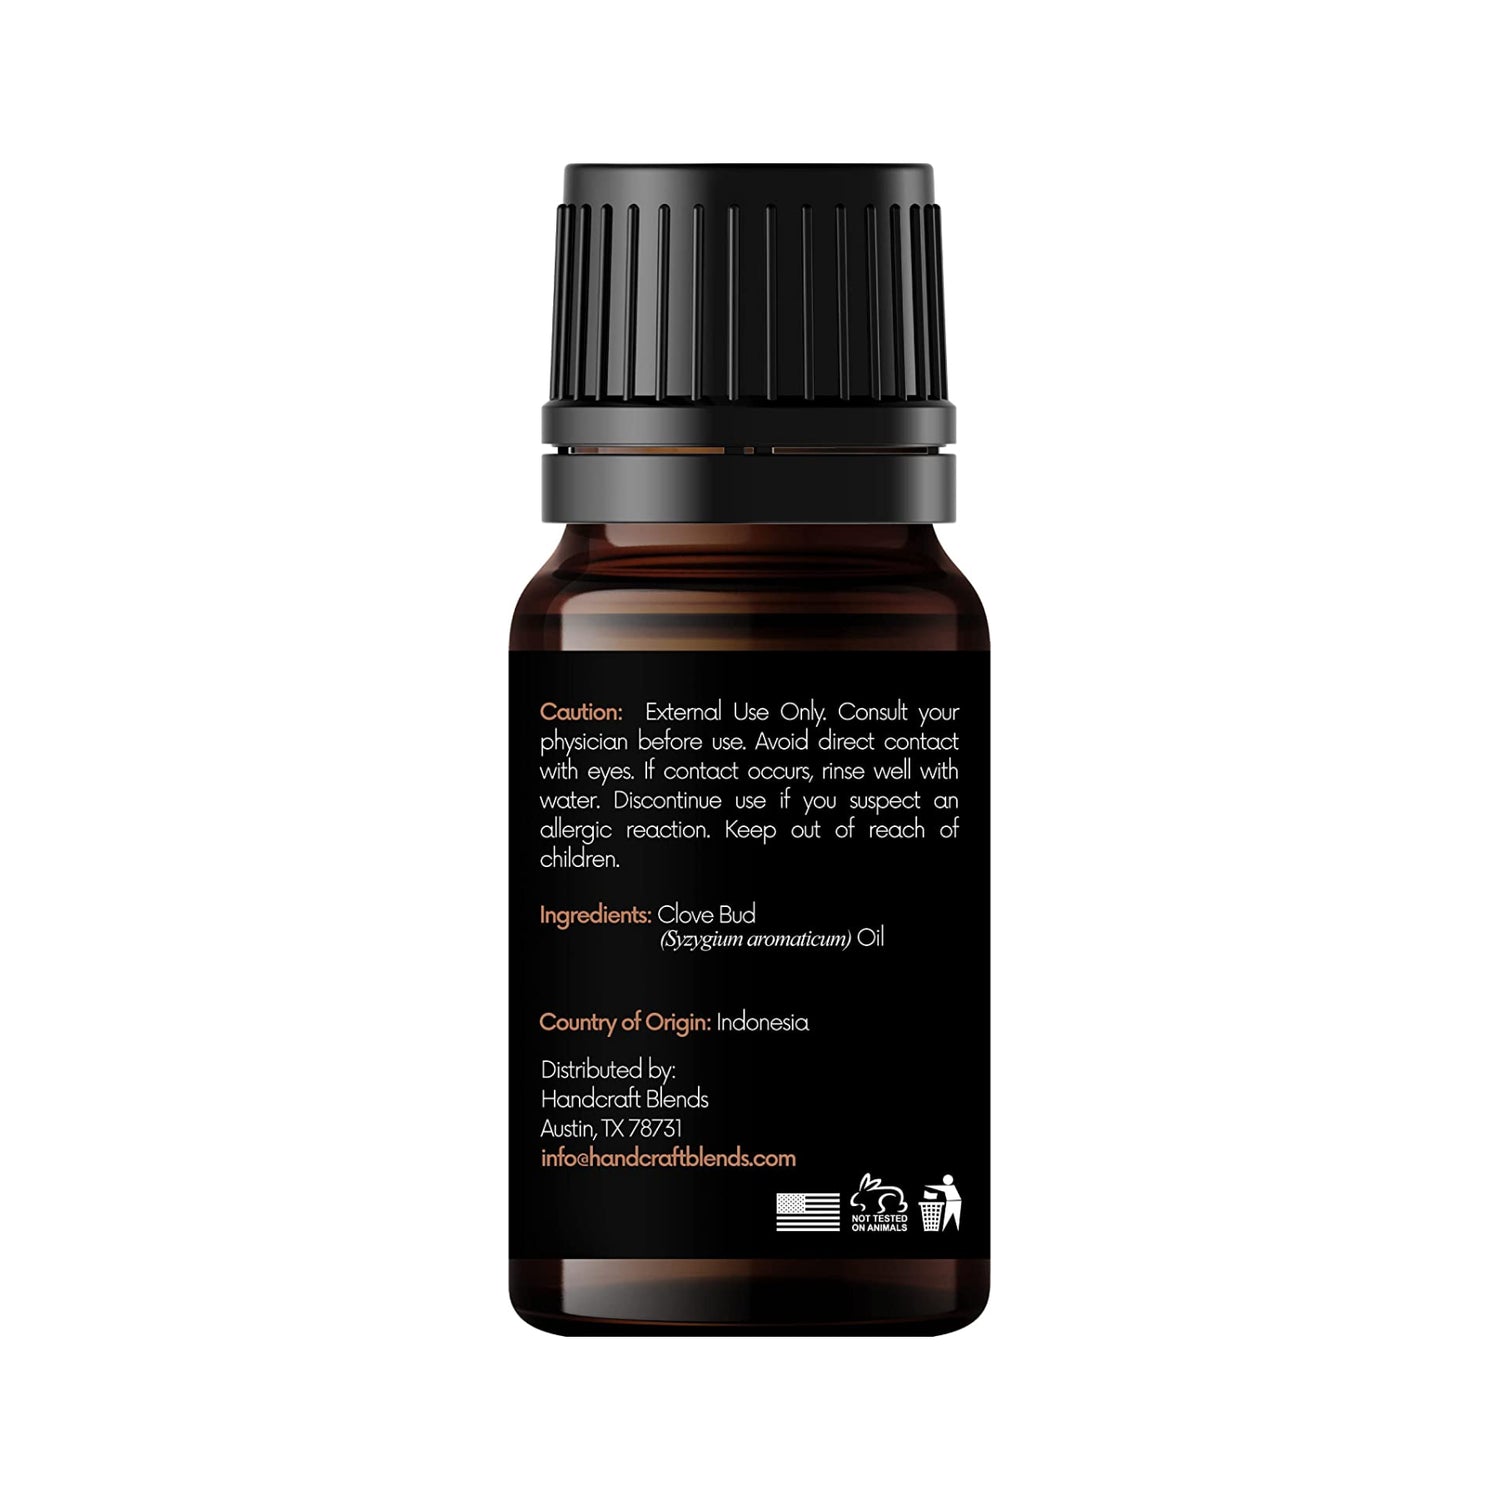 clove bud essential oil back of the bottle